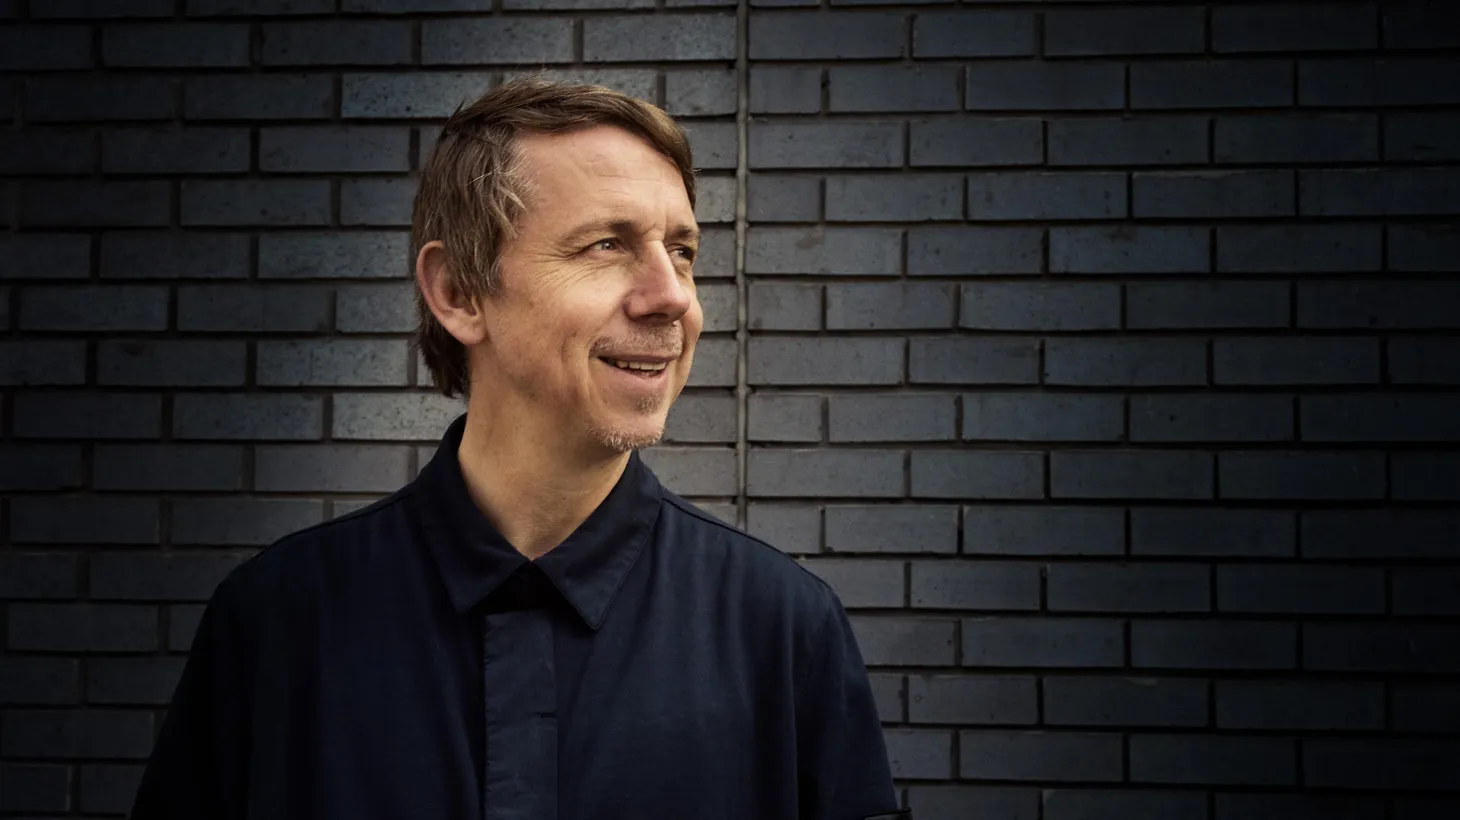 BBC radio DJ Gilles Peterson, one of the most influential taste makers in the world, is the ultimate collector whose enthusiasm for the obscure is... (Airs 10:15)